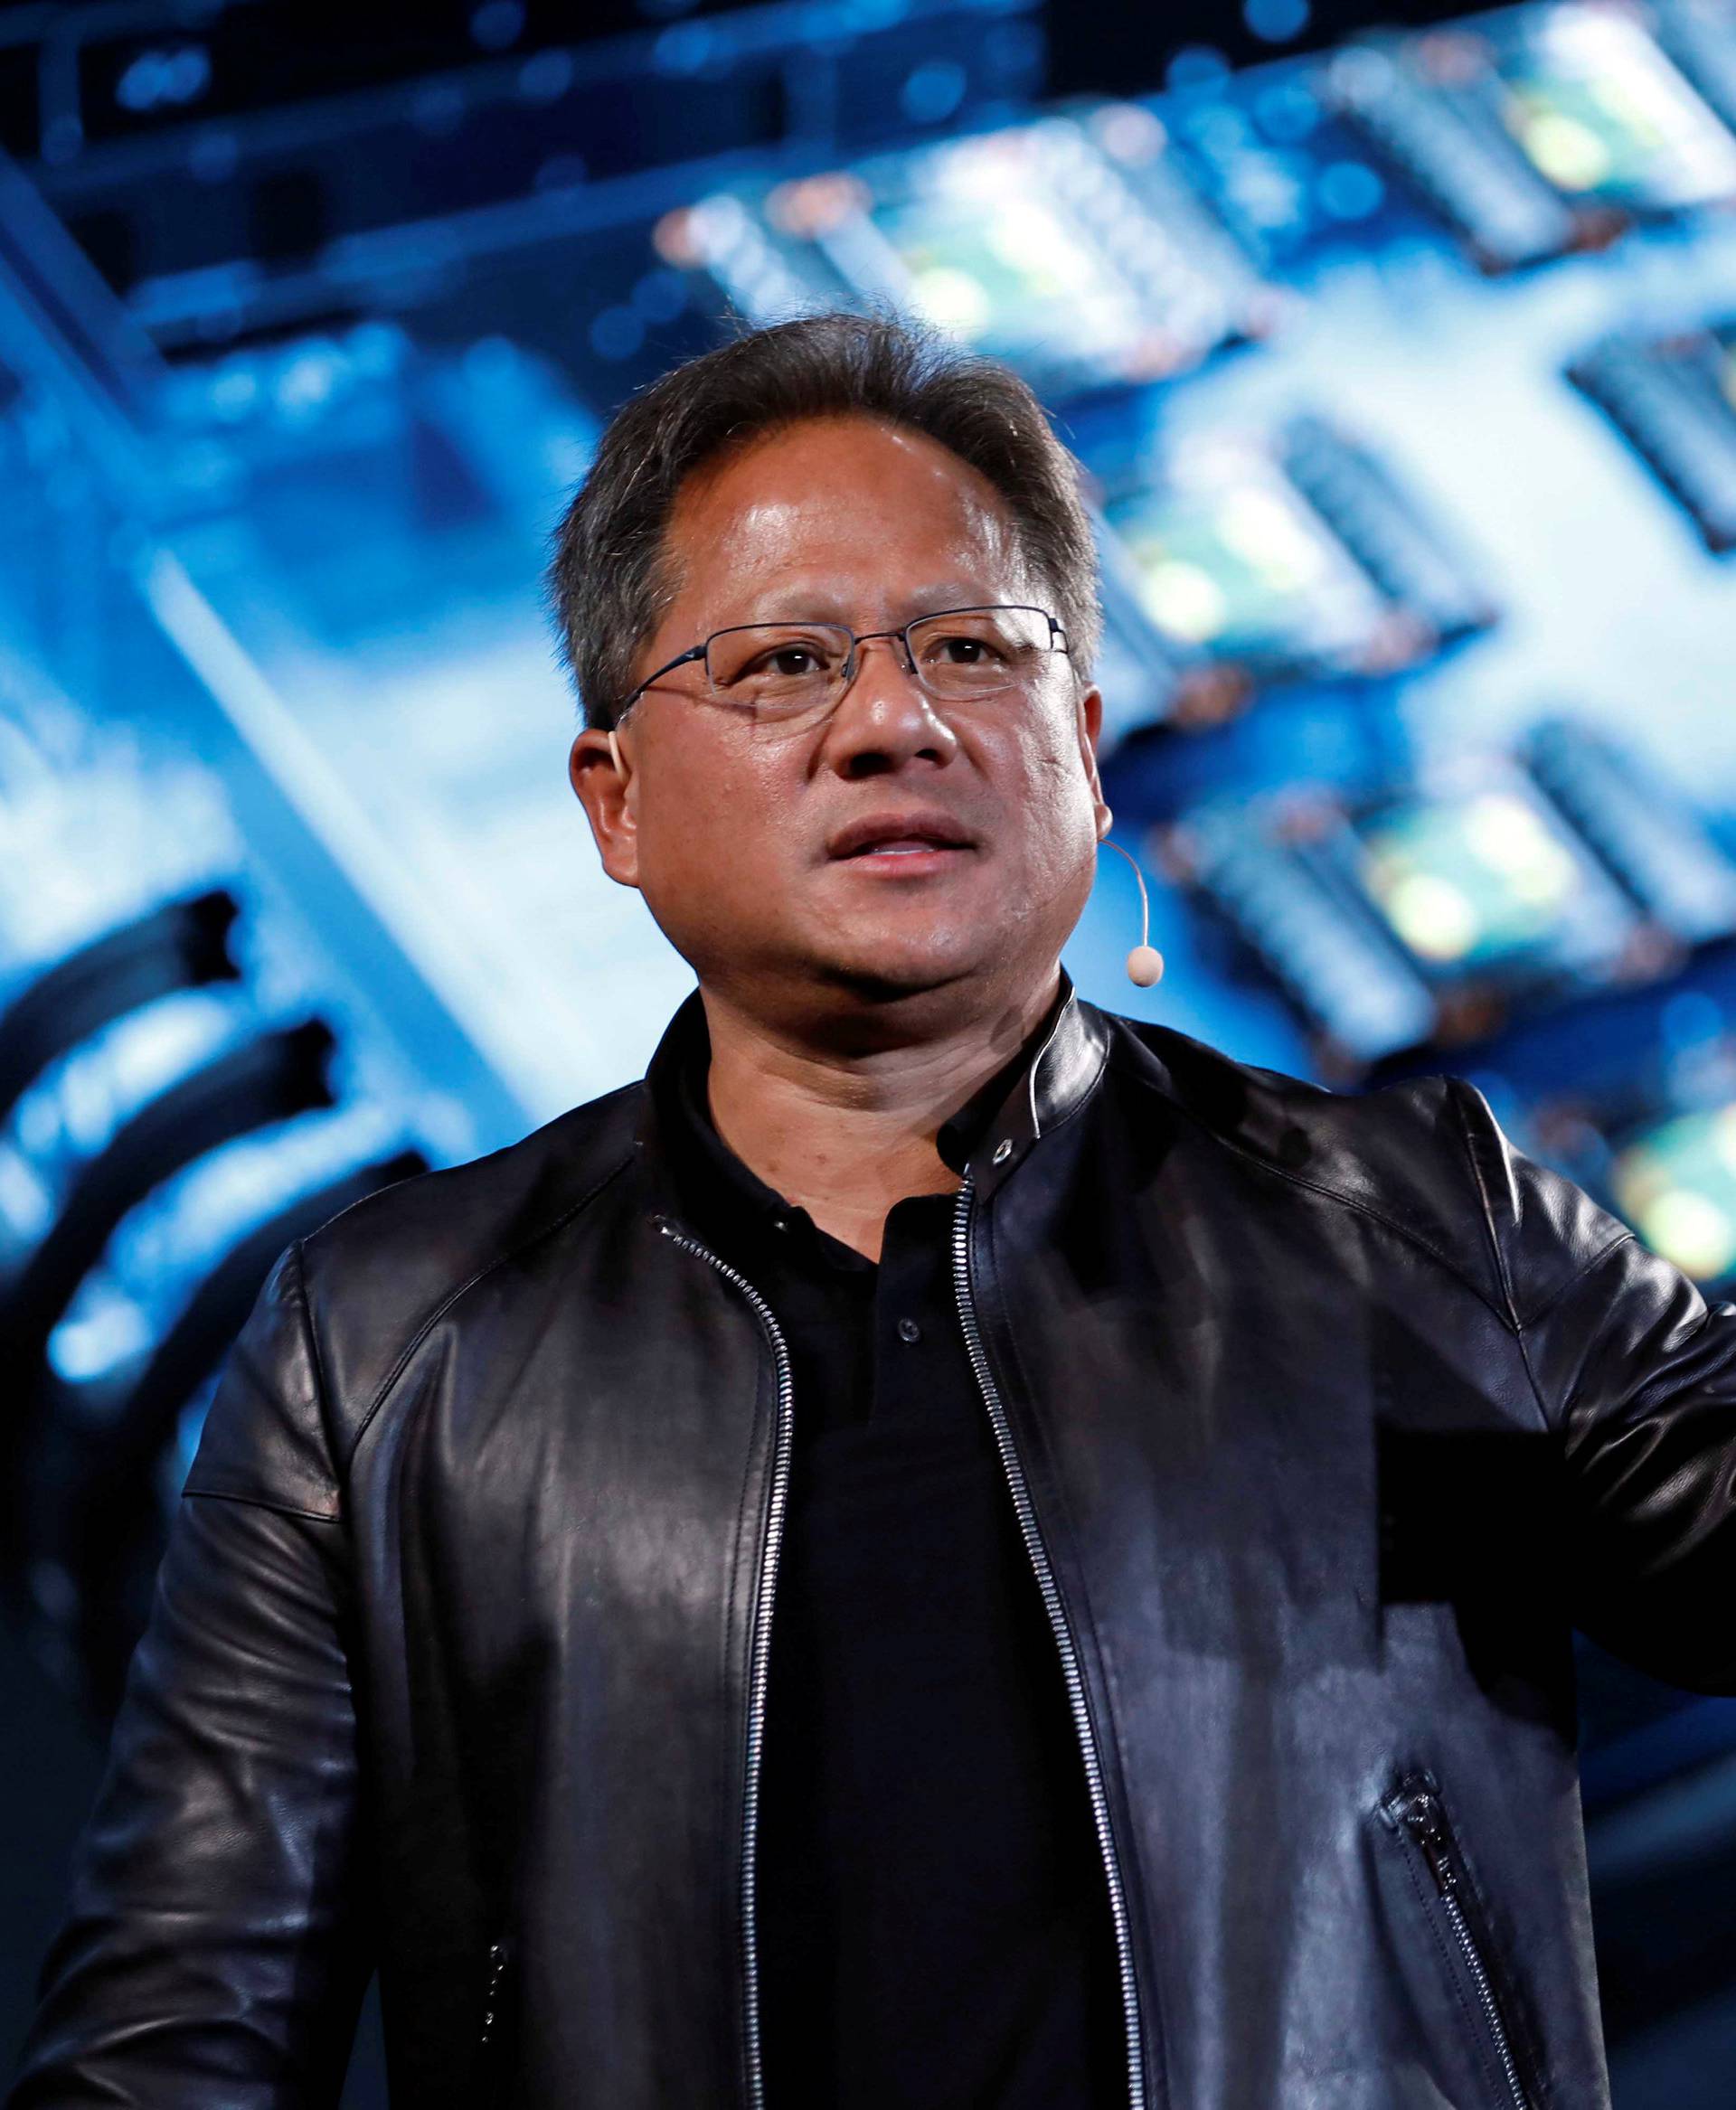 Nvidia co-founder and CEO Jensen Huang attends an event during the annual Computex computer exhibition in Taipei